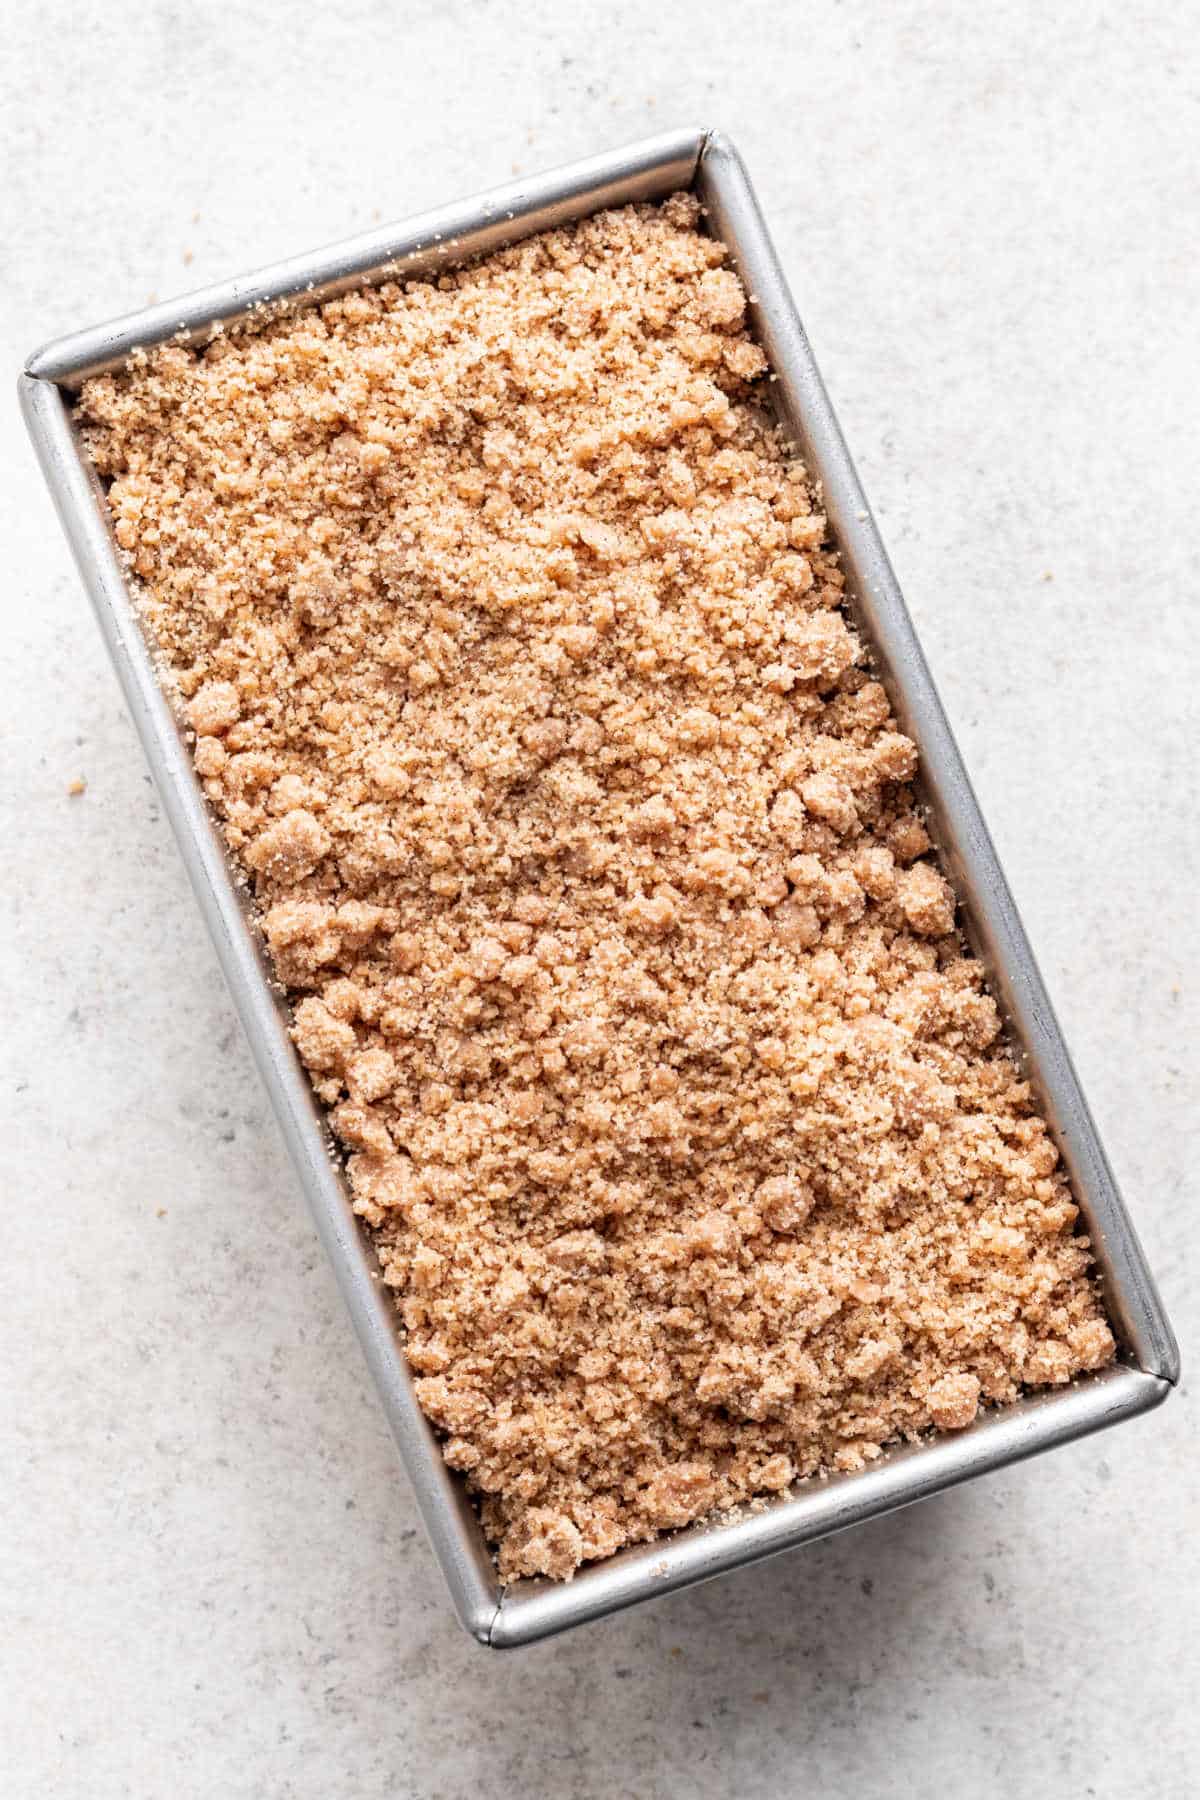 Brown sugar crumble on top of cake batter in a loaf pan.